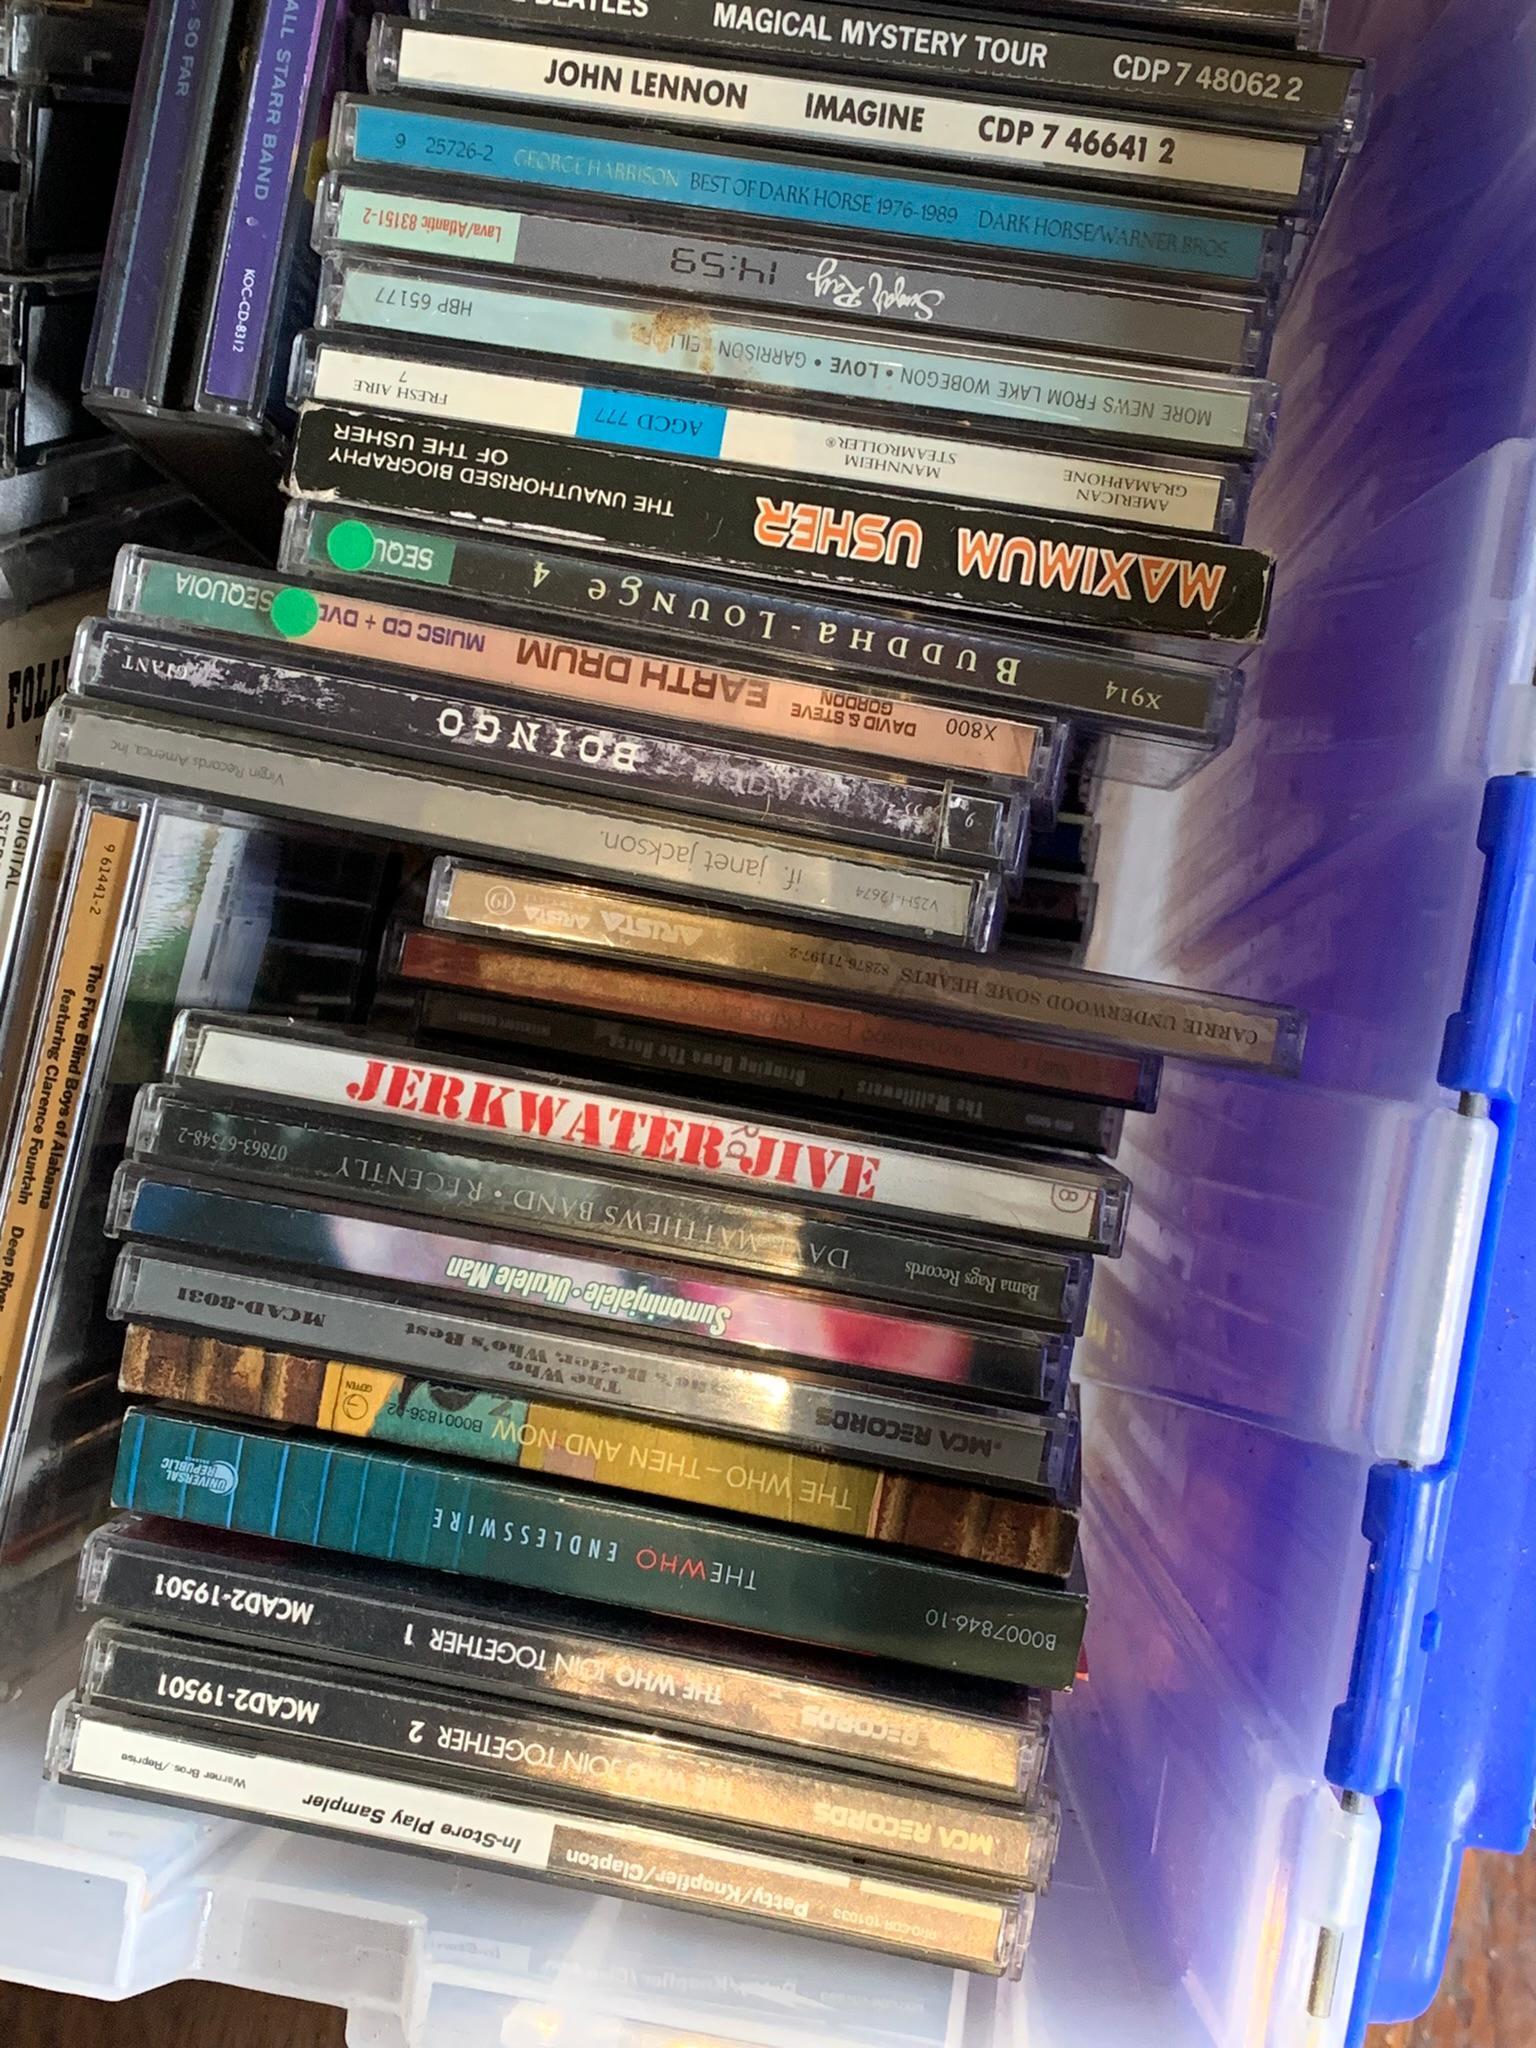 Two Totes Full of CDs